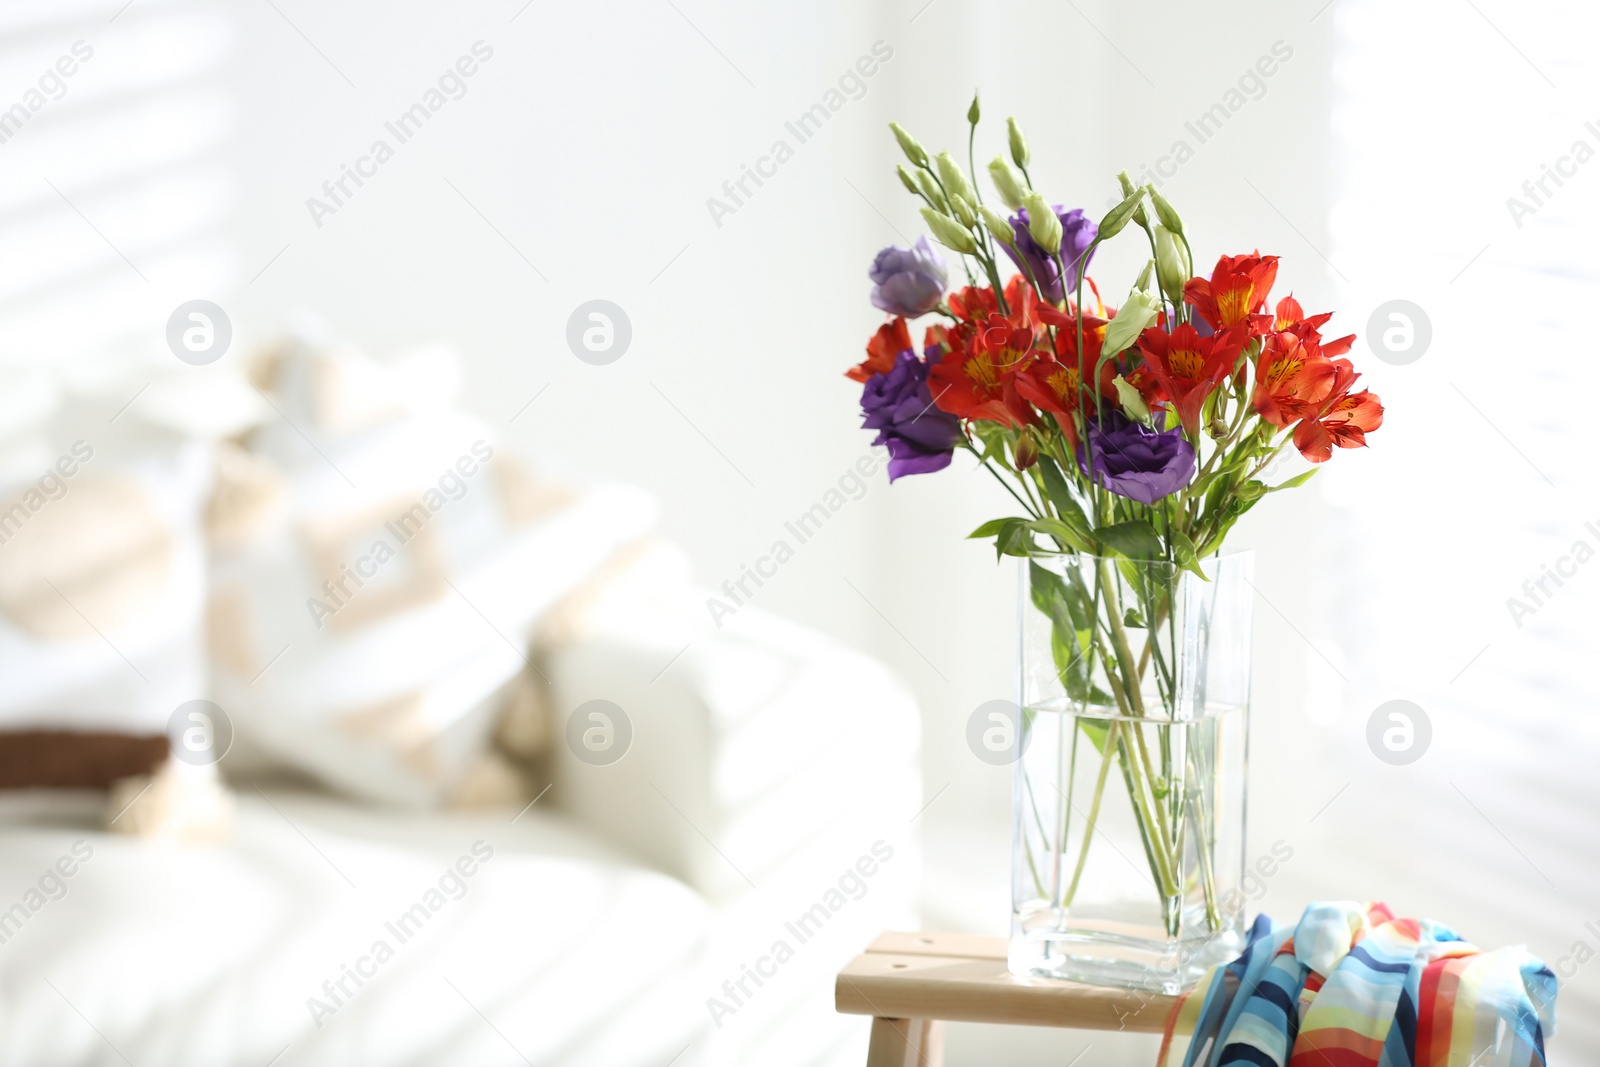 Photo of Vase with beautiful flowers on wooden table in room, space for text